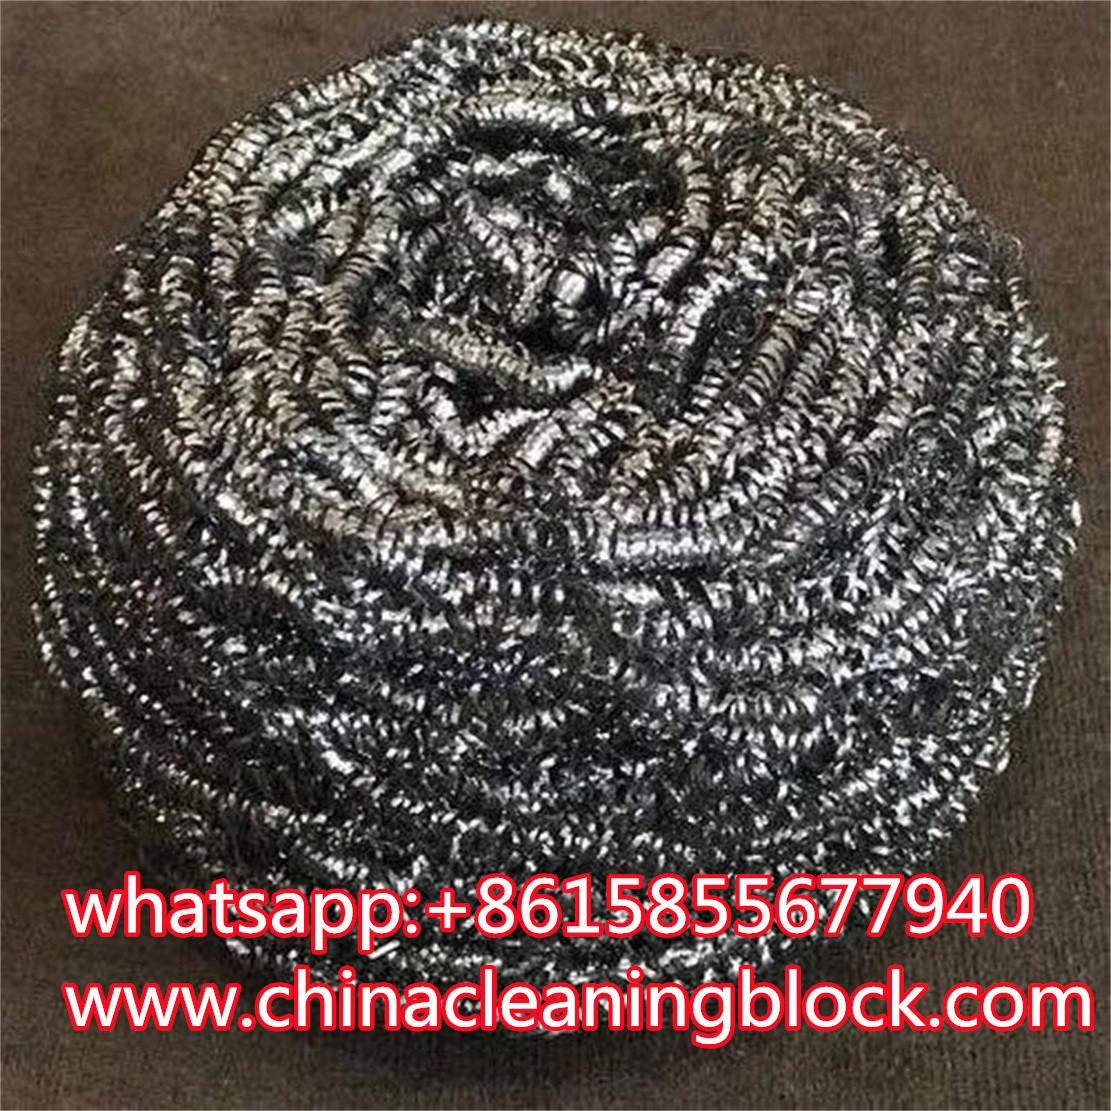 Wholesale X-Large Scrubber, stainless steel pot scrubber stainless steel scrubber pads from china suppliers